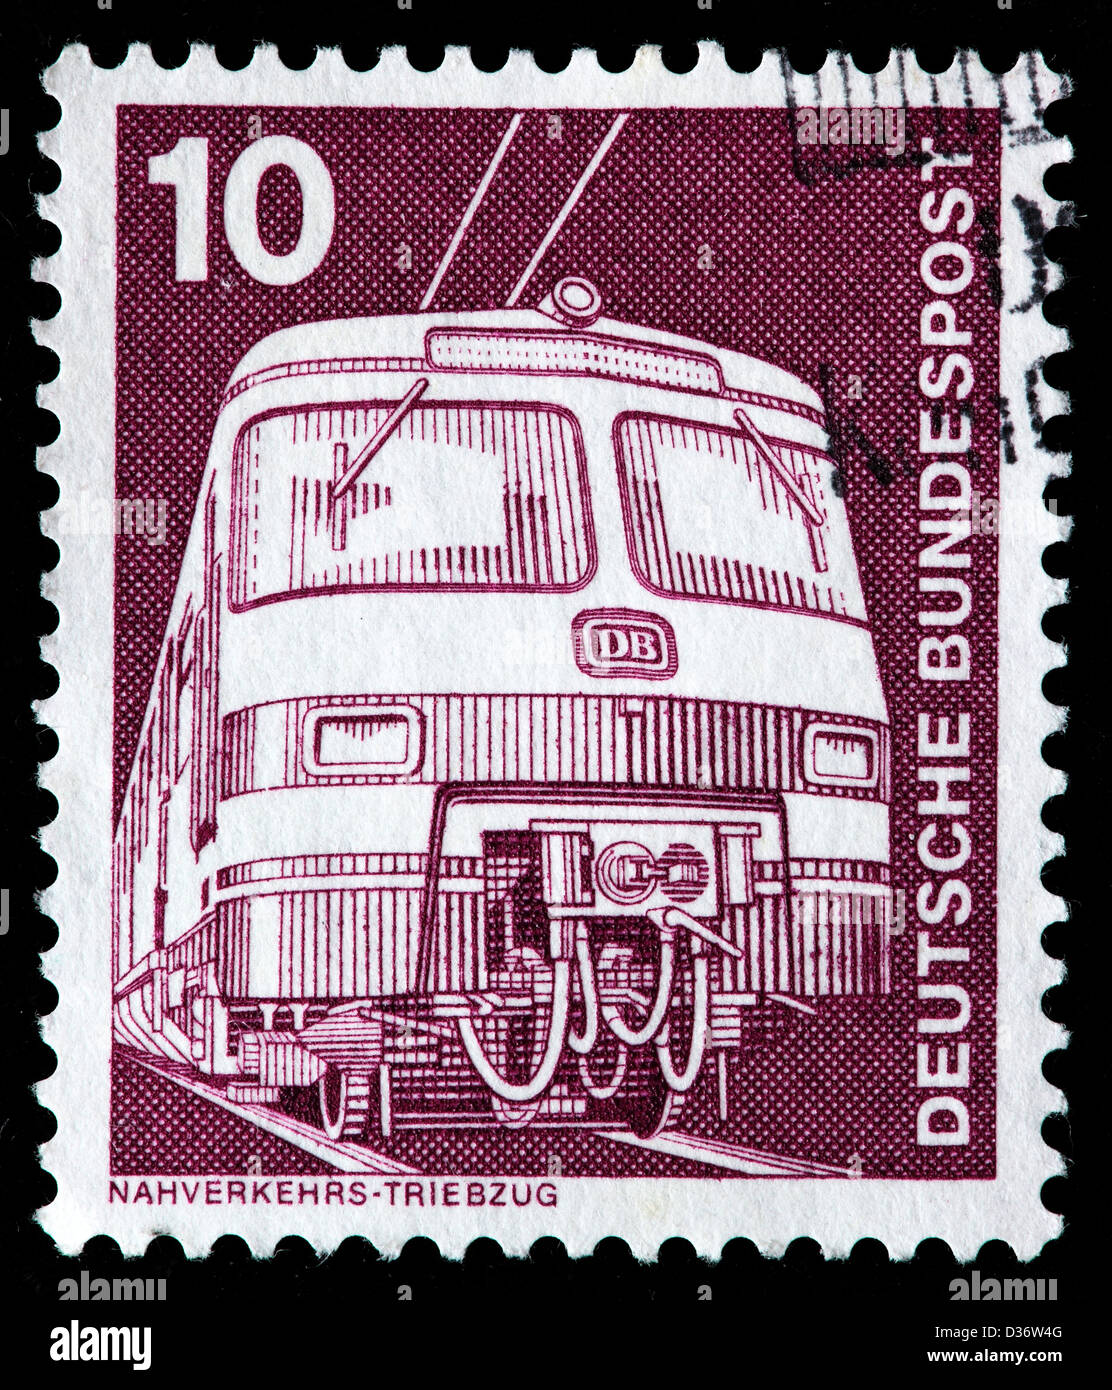 Electric train, postage stamp, Germany, 1975 Stock Photo